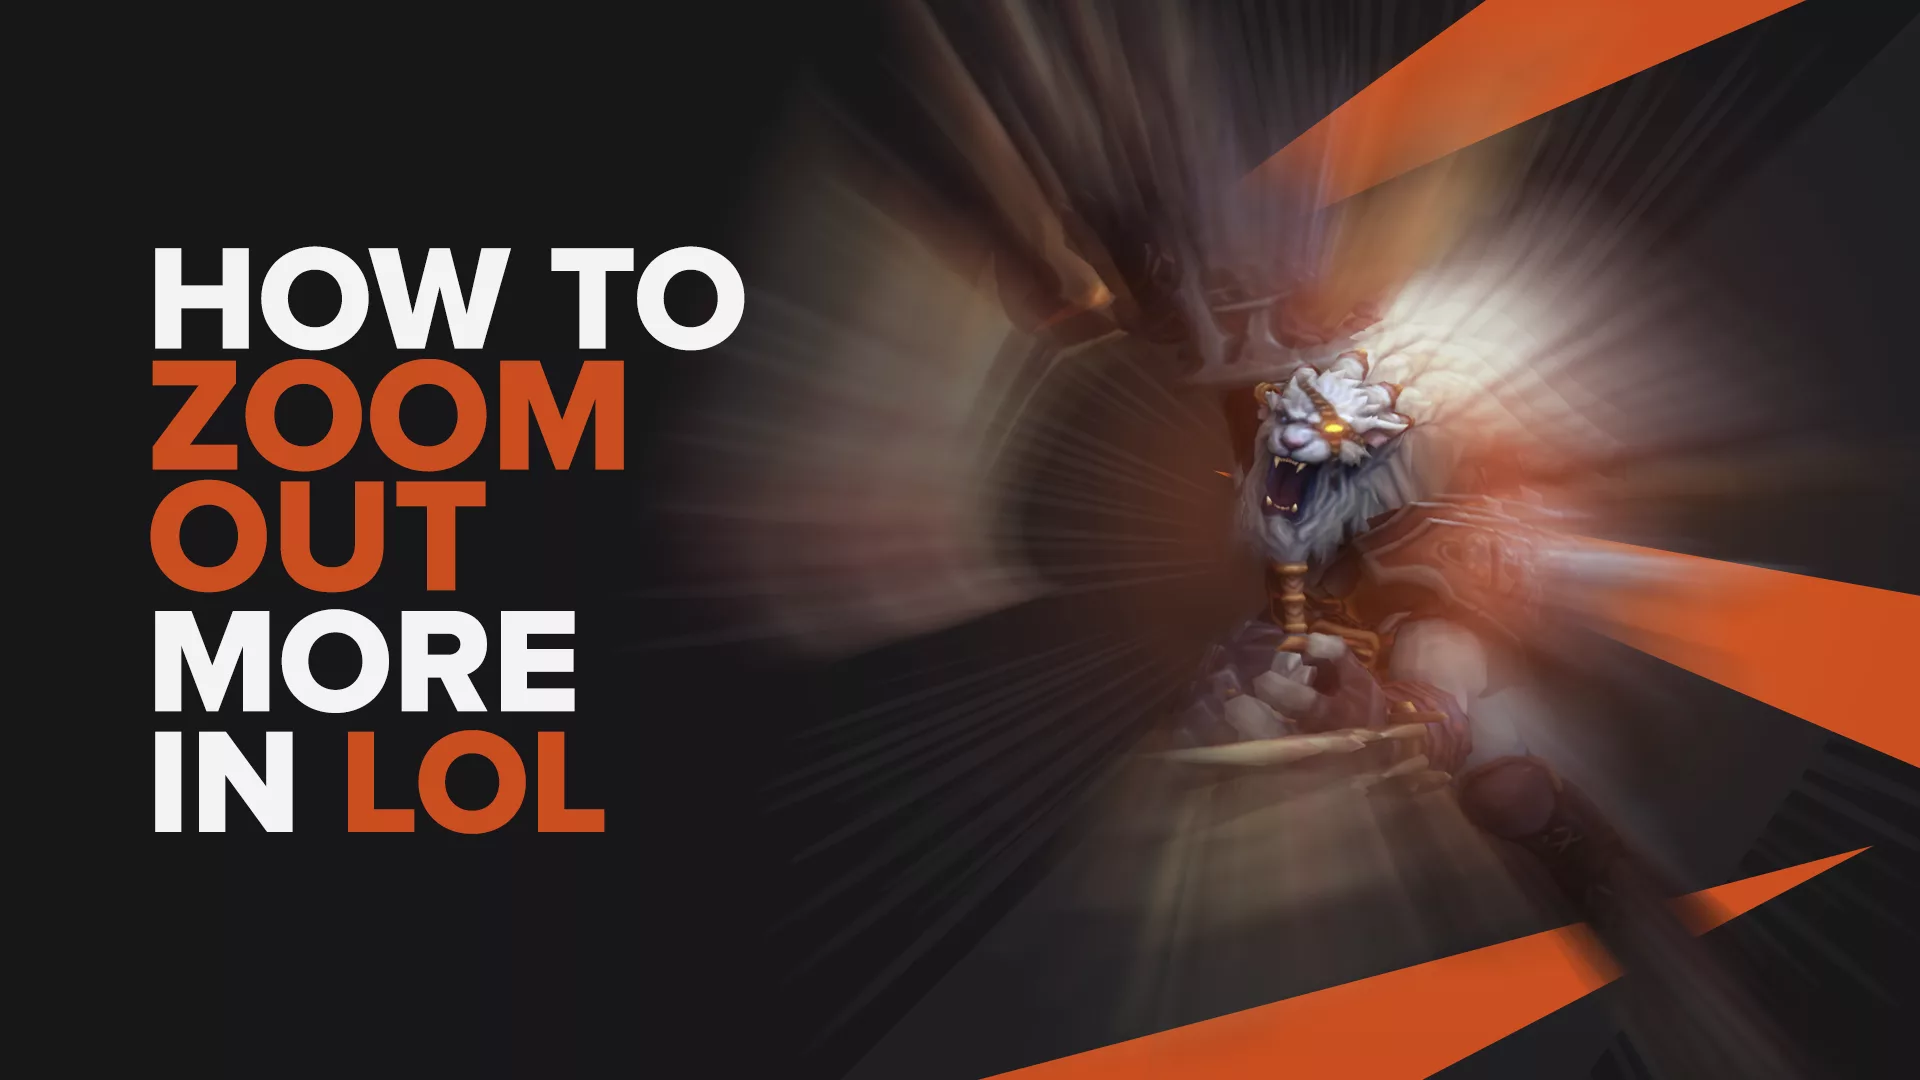 How To Zoom Out More in League of Legends | LoL